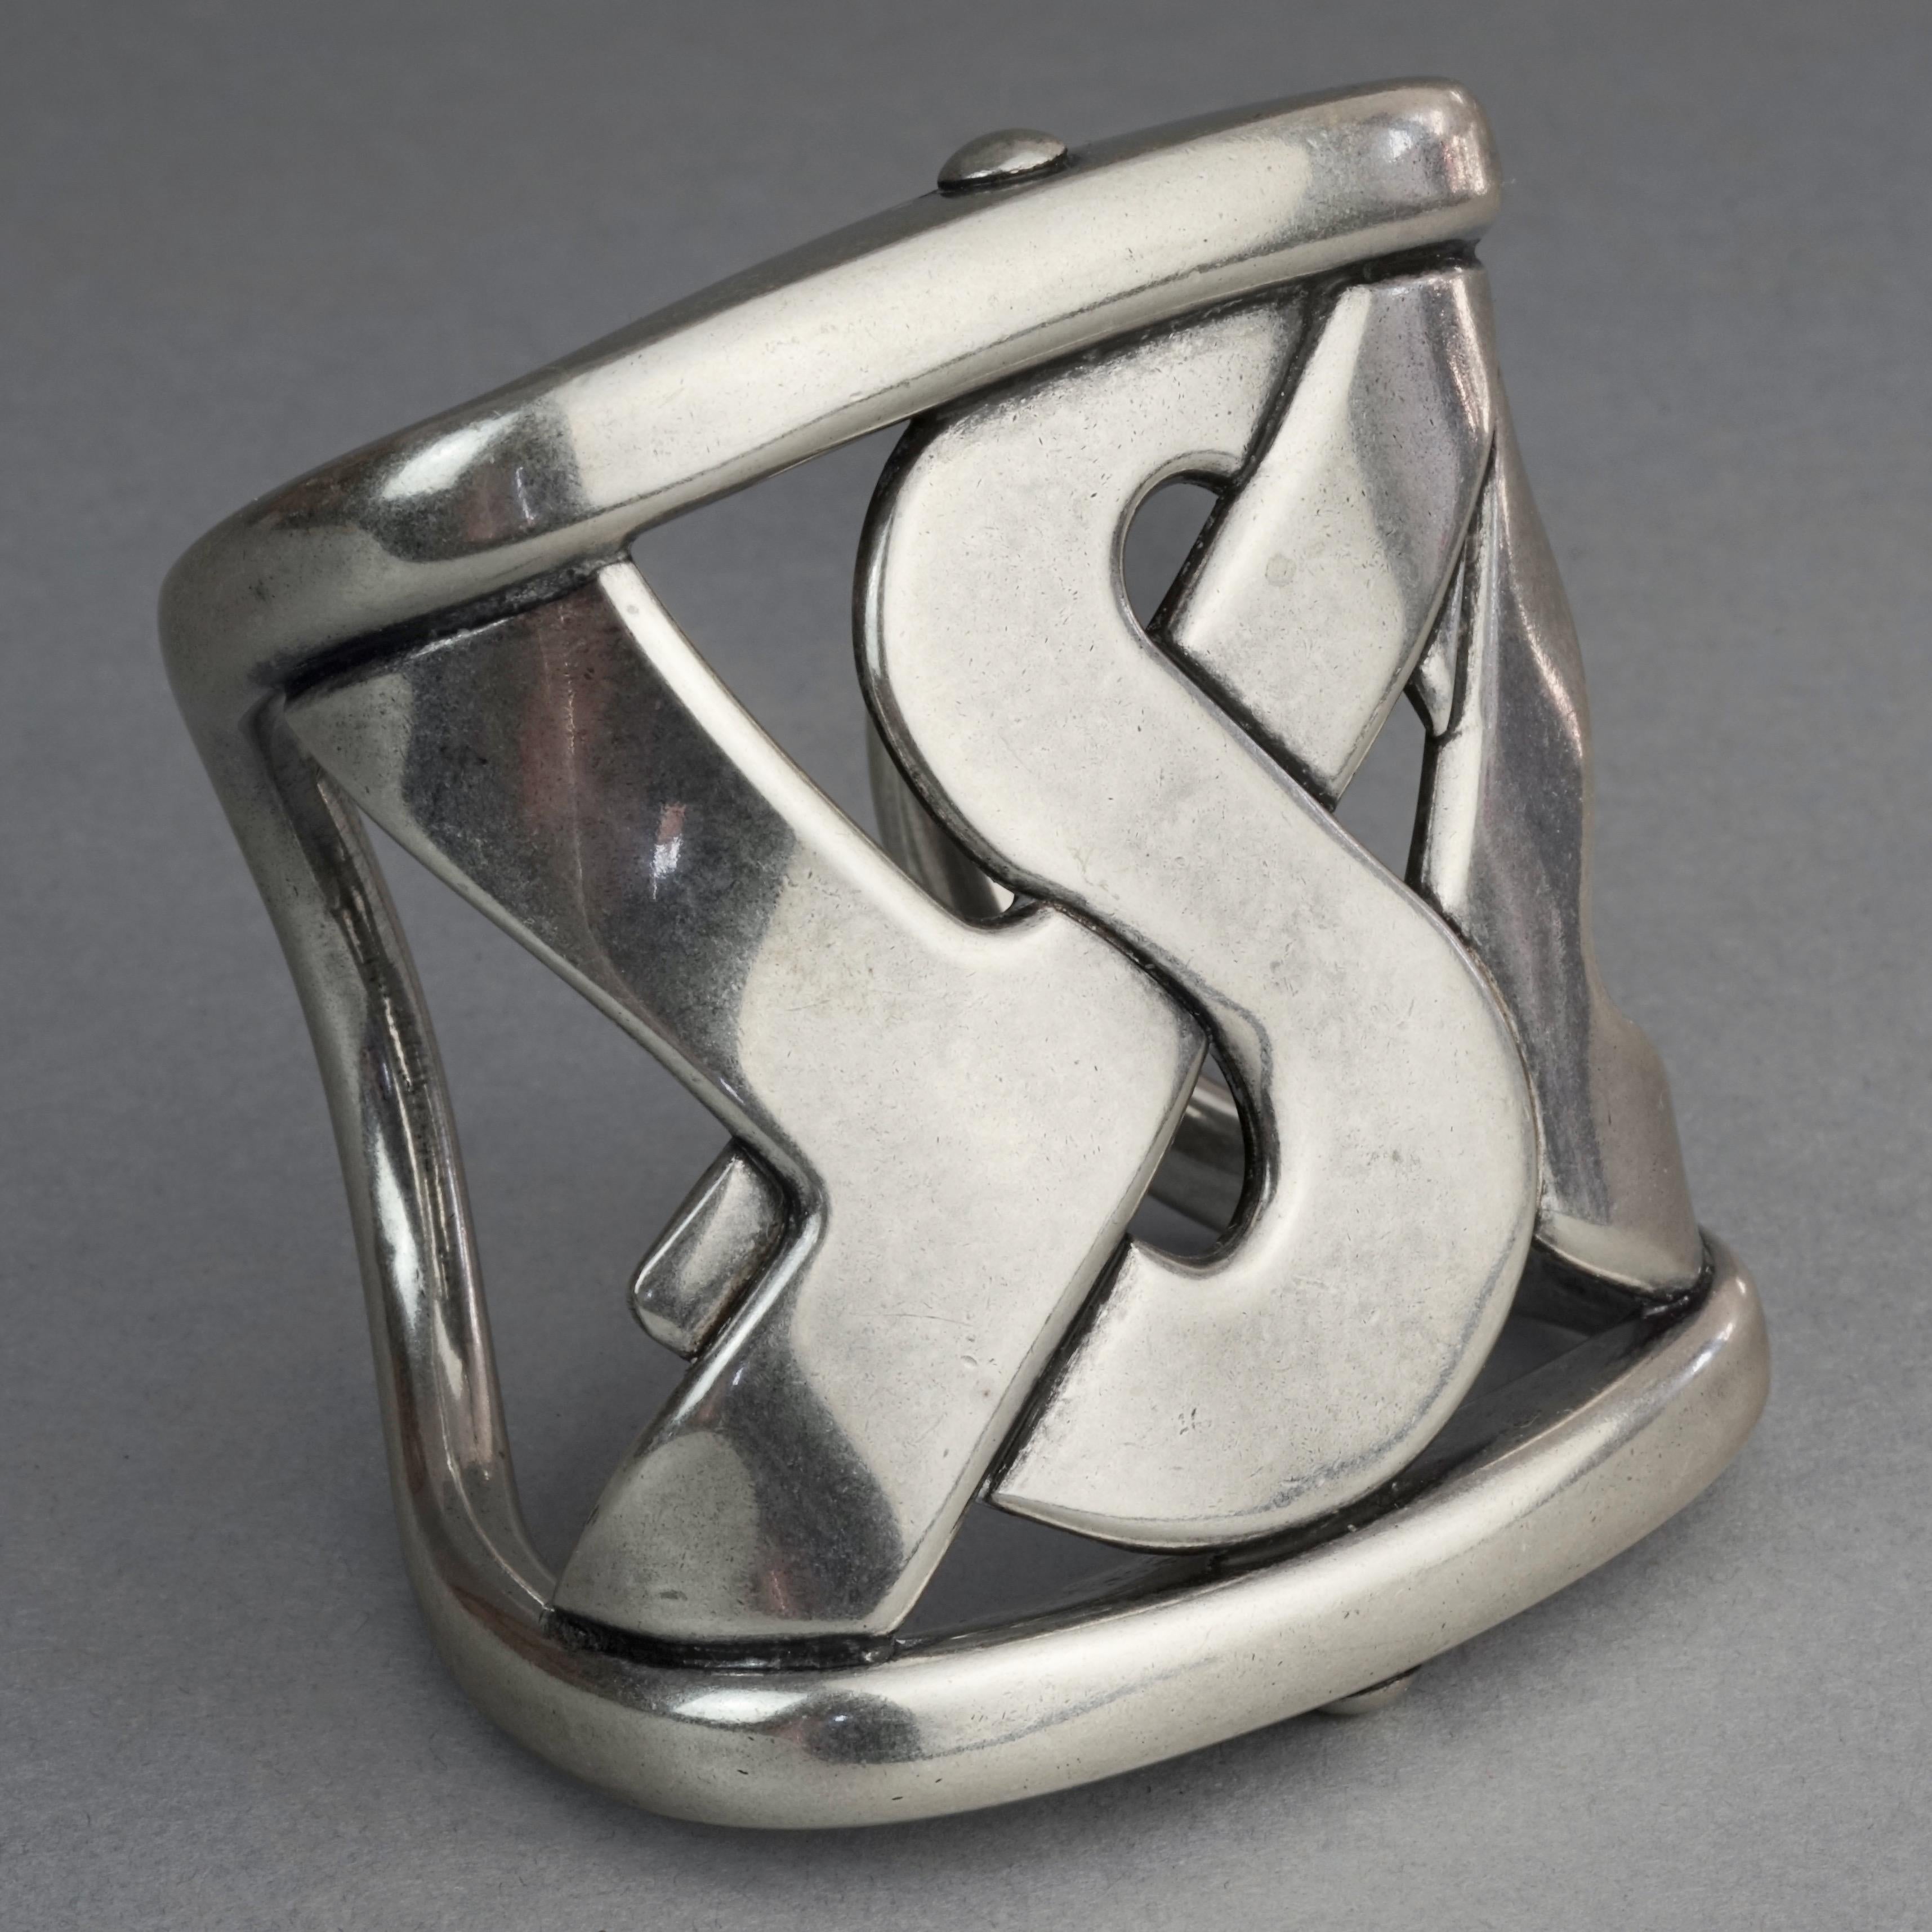 YVES SAINT LAURENT Ysl Rive Gauche Logo Silver Cuff Bracelet

Measurements:
Height: 2.95 inches (7.5 cm)
Inside Circumference: 6.88 inches (17.5 cm) includes opening

Features:
- 100% Authentic YVES SAINT LAURENT.
- YSL logo silver cuff.
- Signed